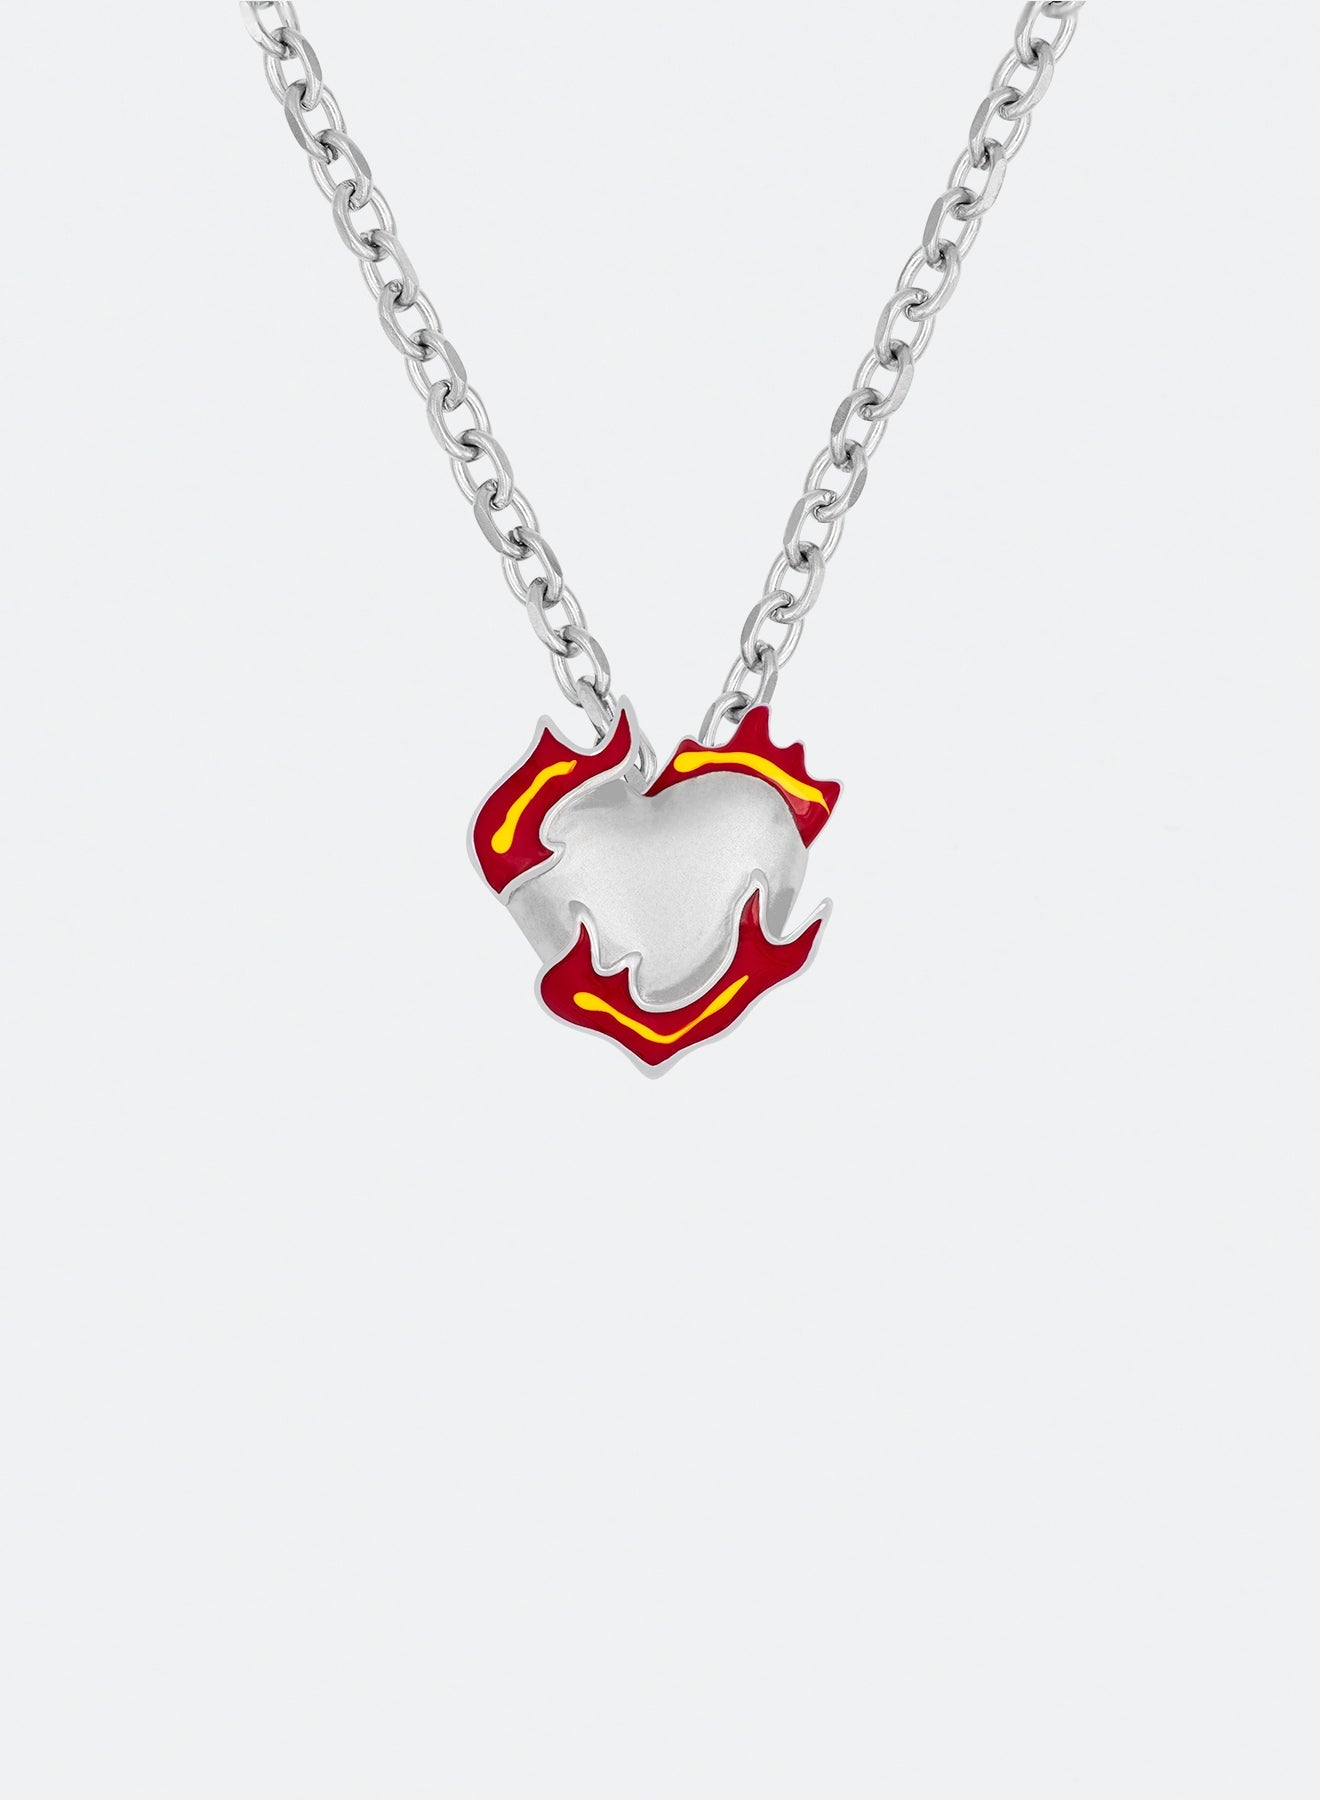 18k white gold coated heart pendant necklace with red-yellow hand painted enamel and satined finishing